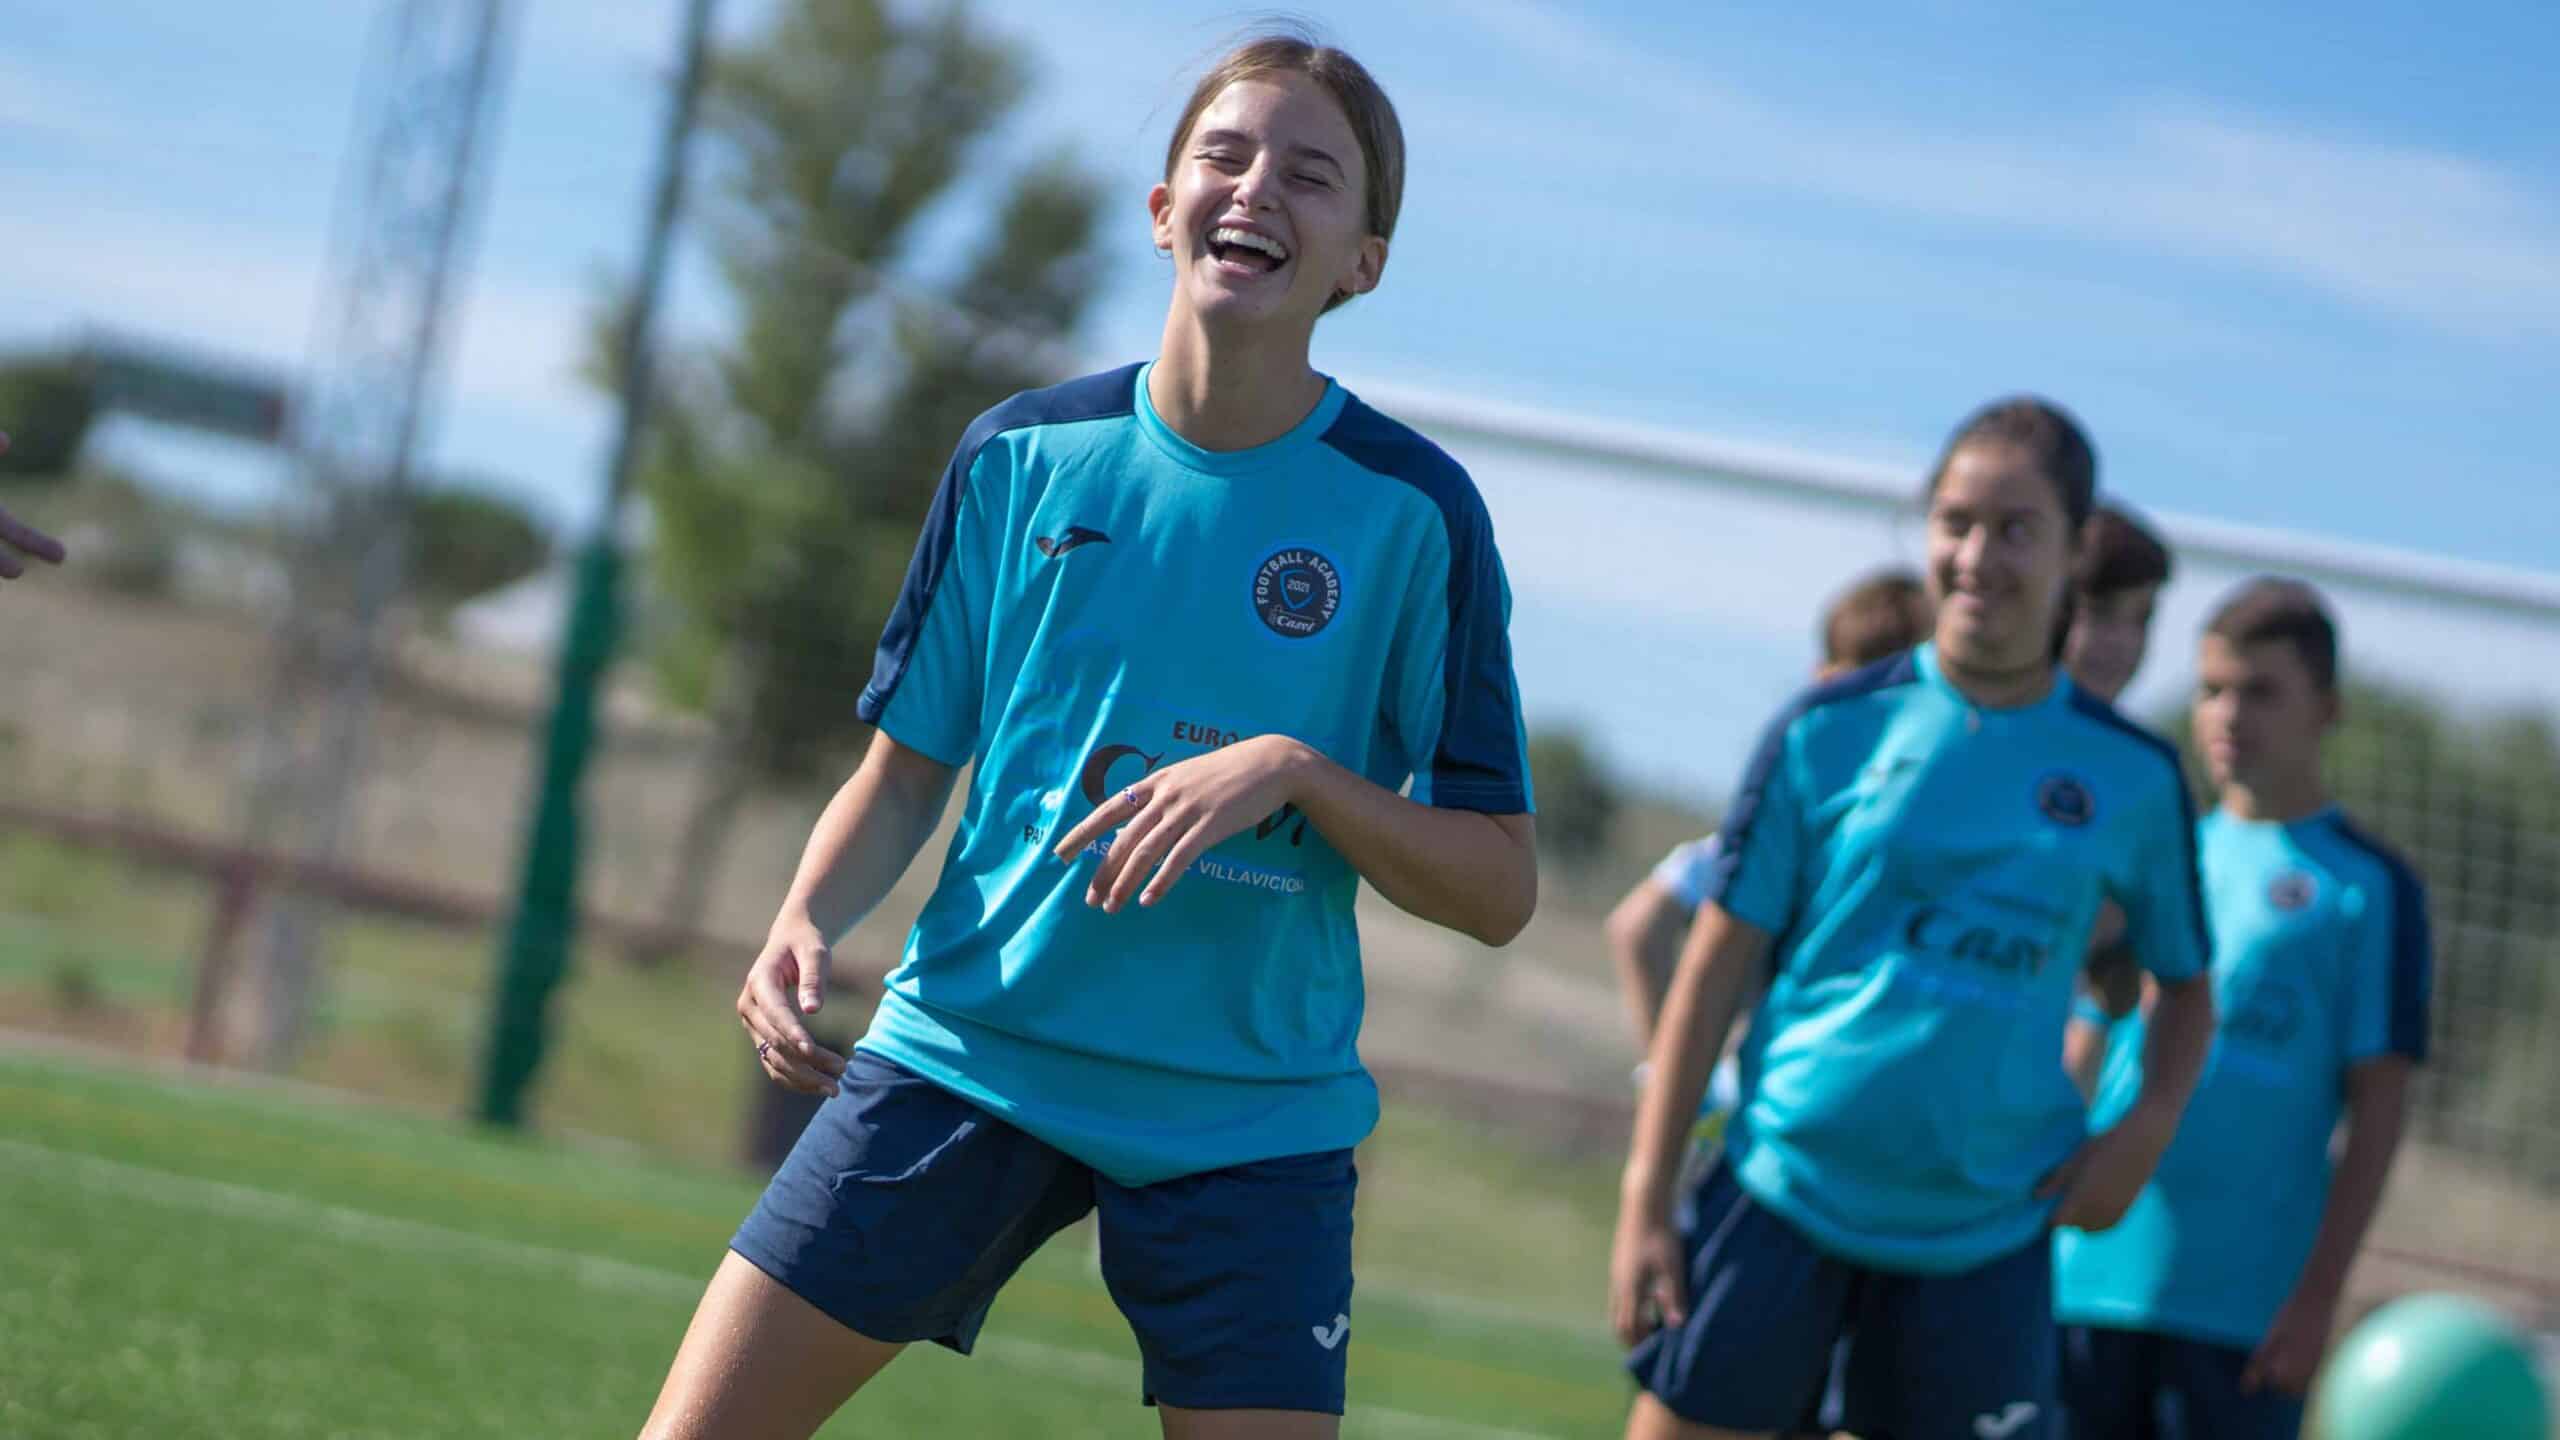 Women's soccer in Spain and at Casvi Football Academy